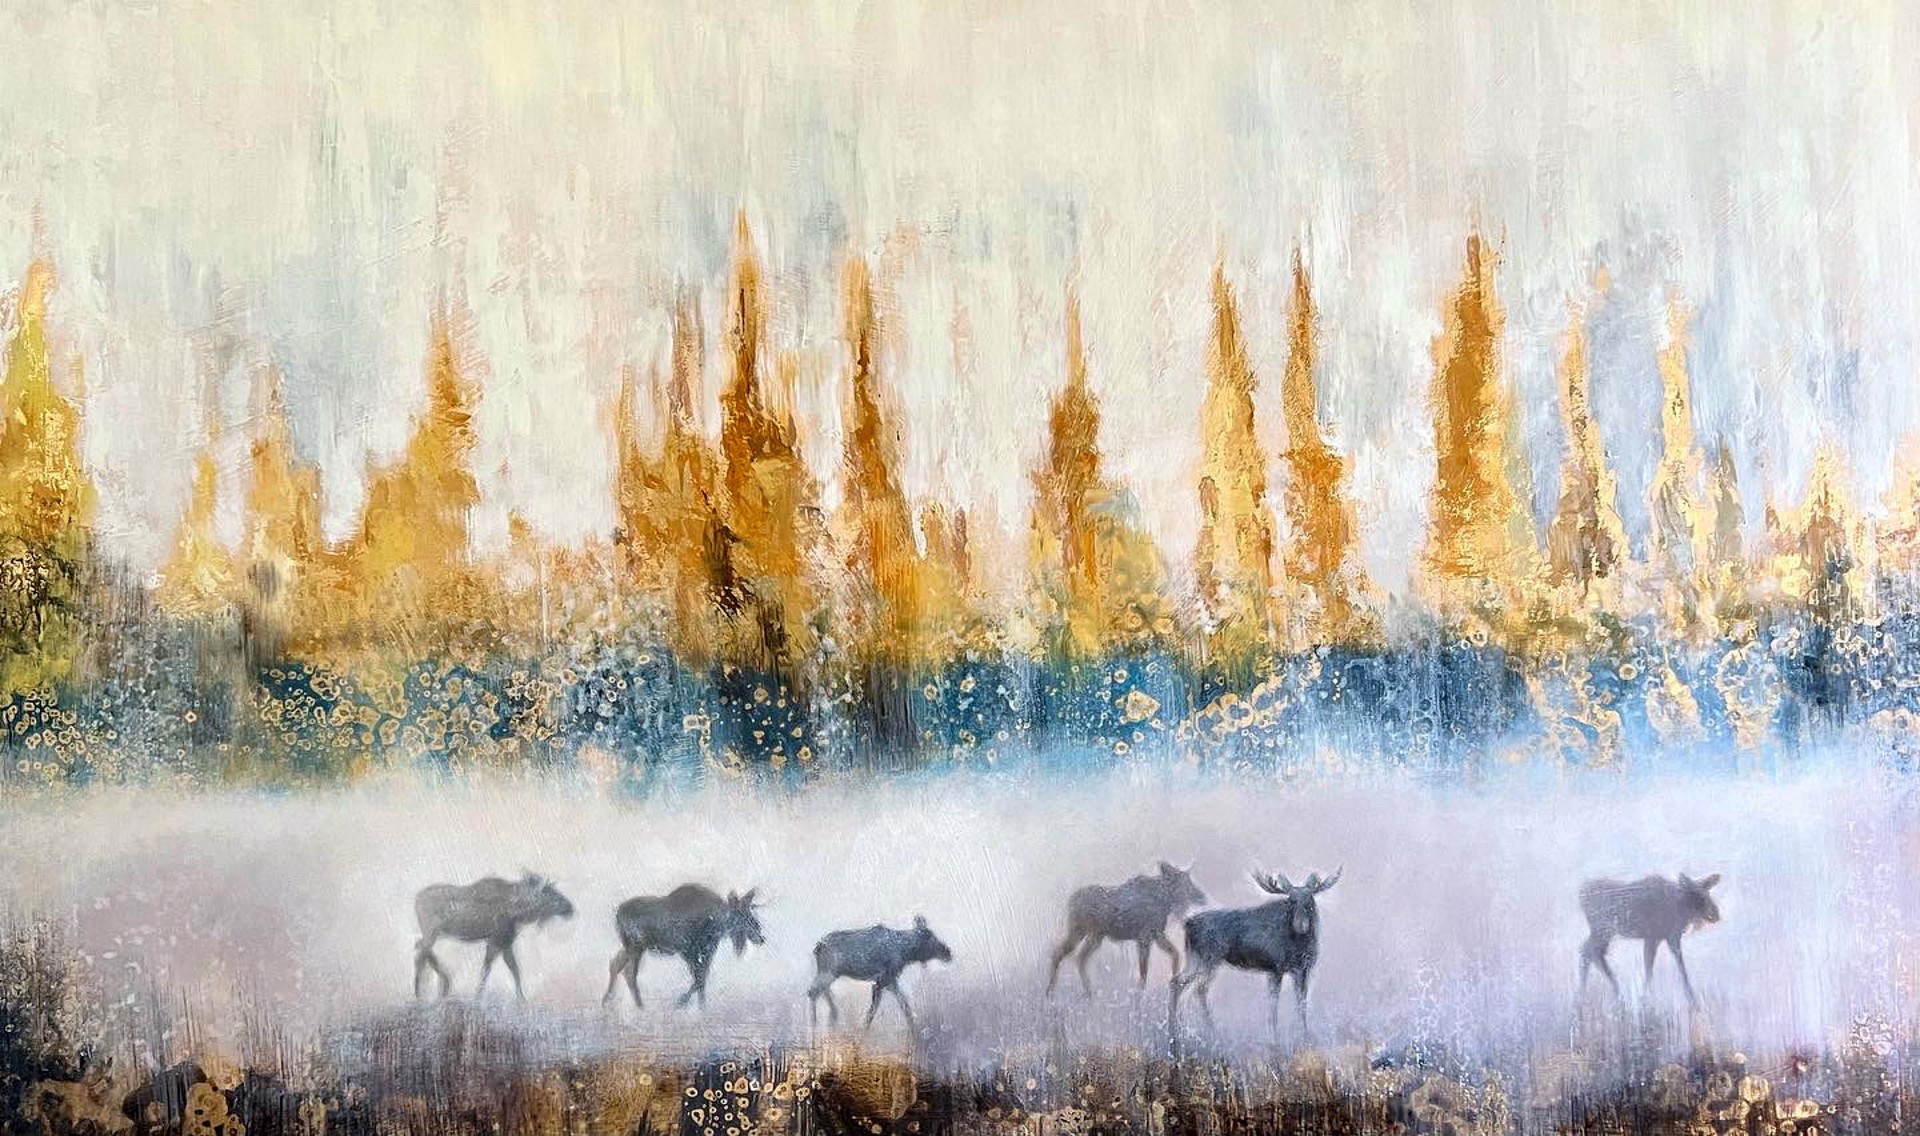 Original Mixed Media Painting By Nealy Riley Featuring Moose Herd Over Abstract Background